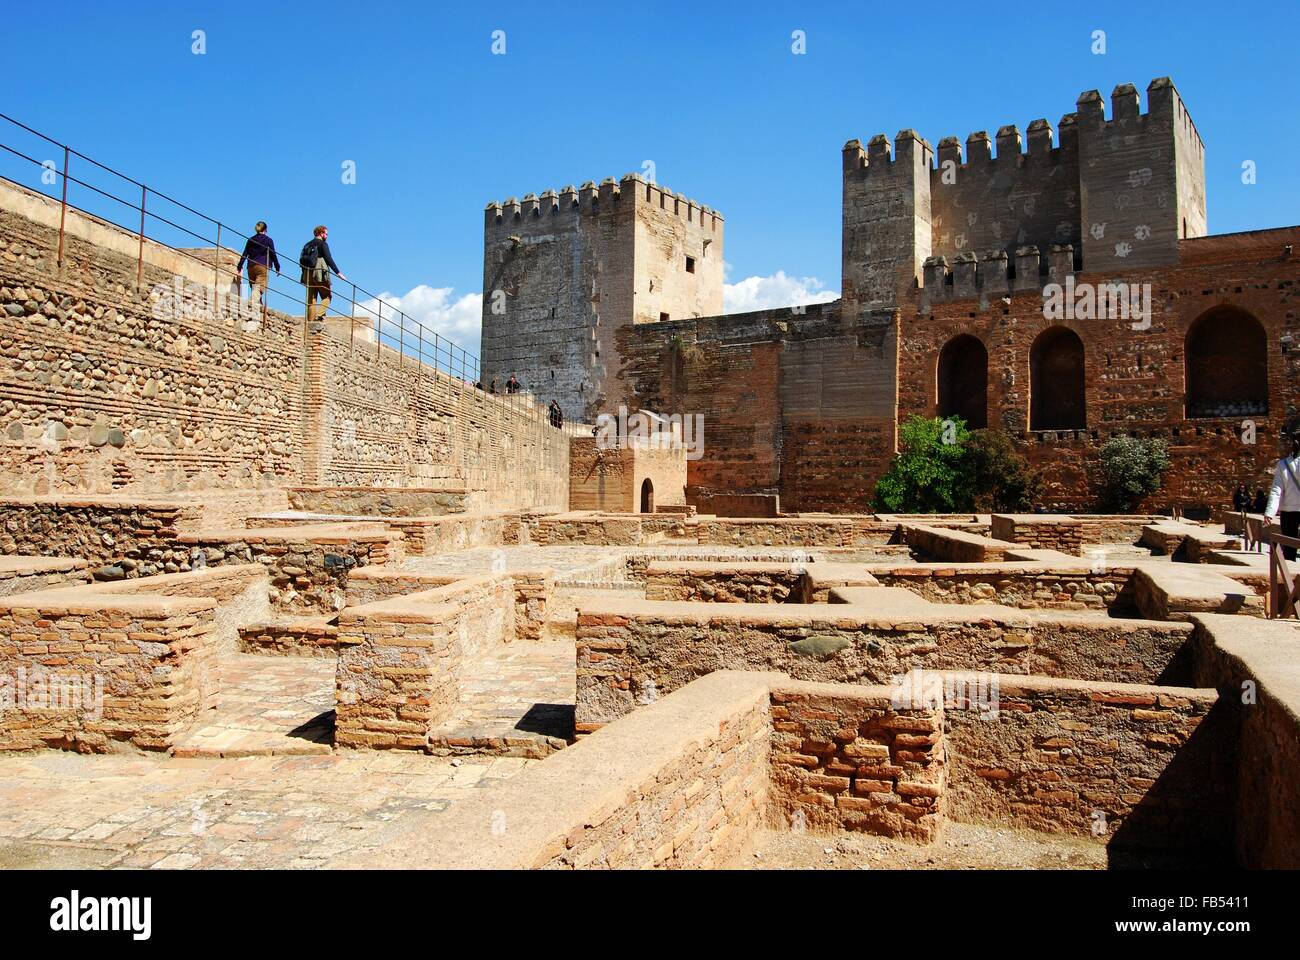 Dungeons and Castrense district (Mazmorras y Barrio Castrense) within Castle, Palace of Alhambra, Granada, Spain. Stock Photo